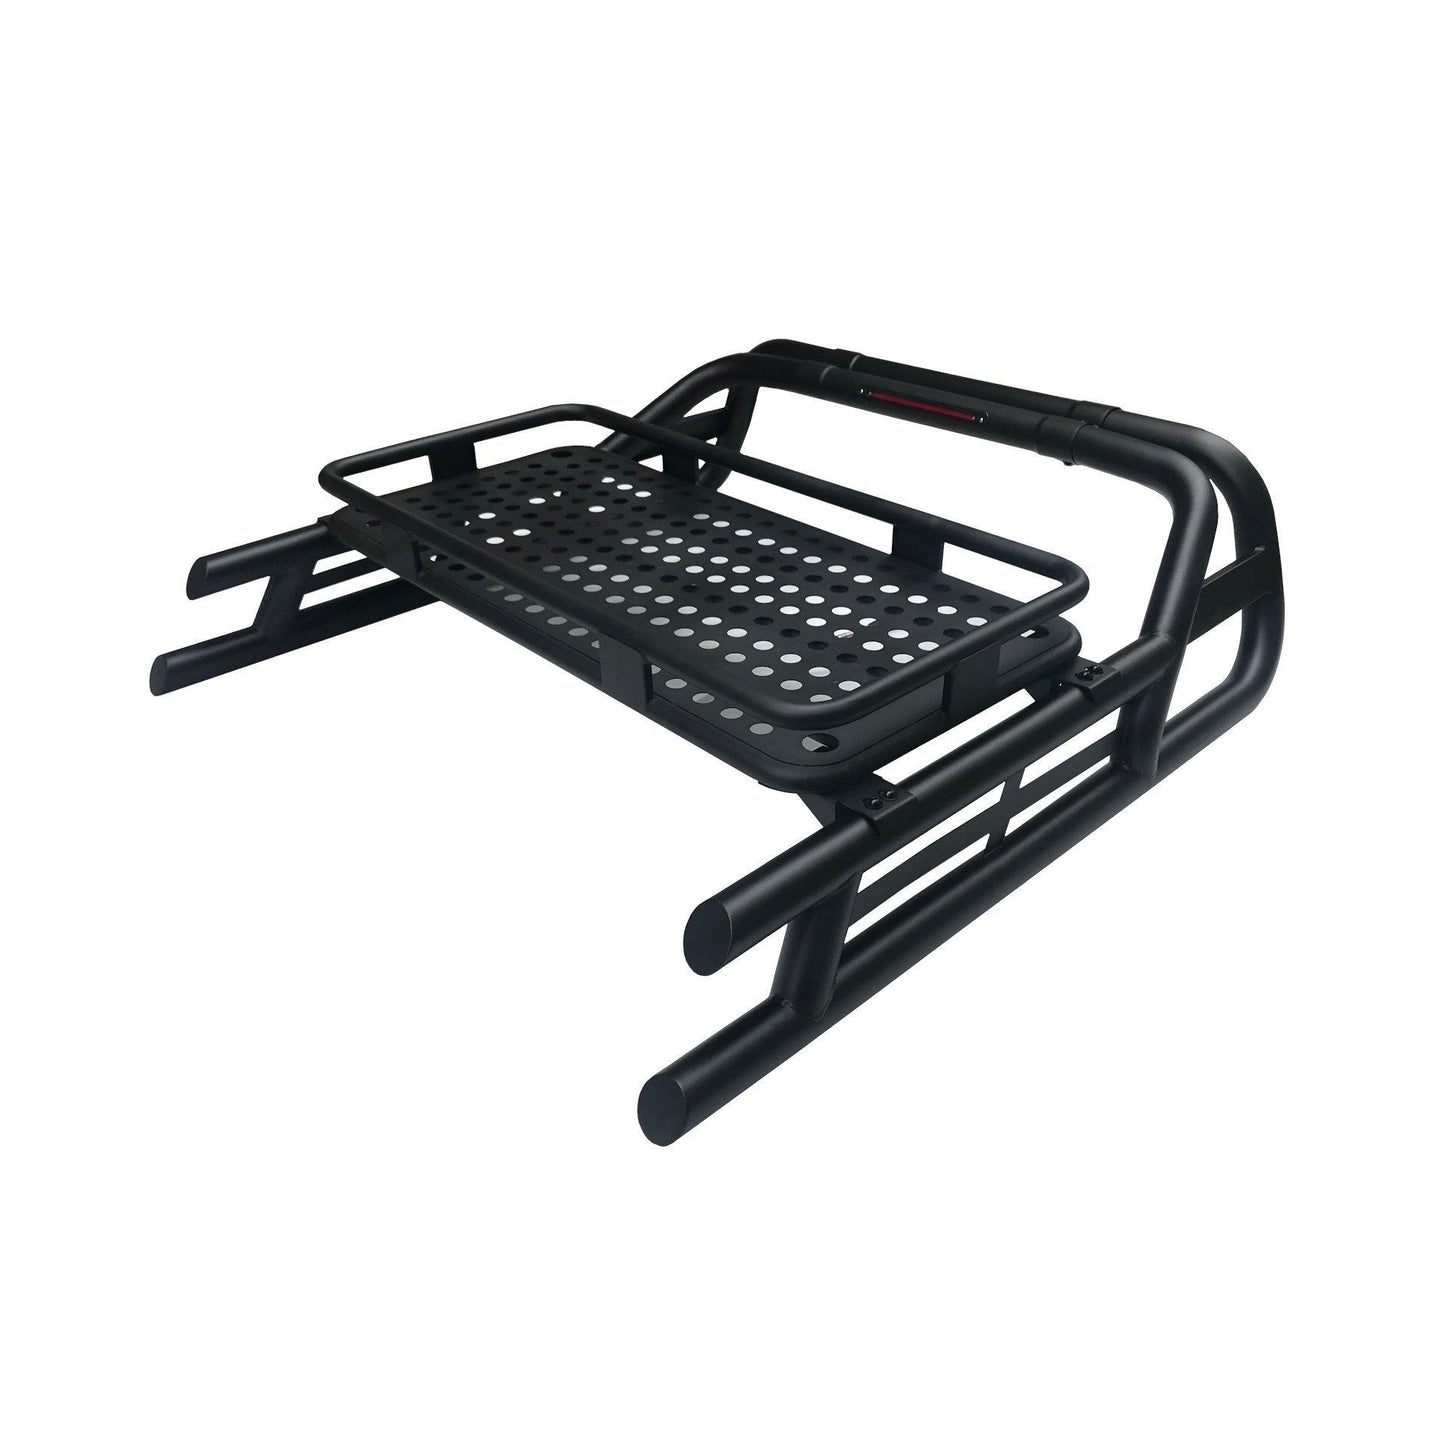 Black SUS201 Long Arm Roll Bar with Cargo Basket Rack for the Ford Ranger 2012+